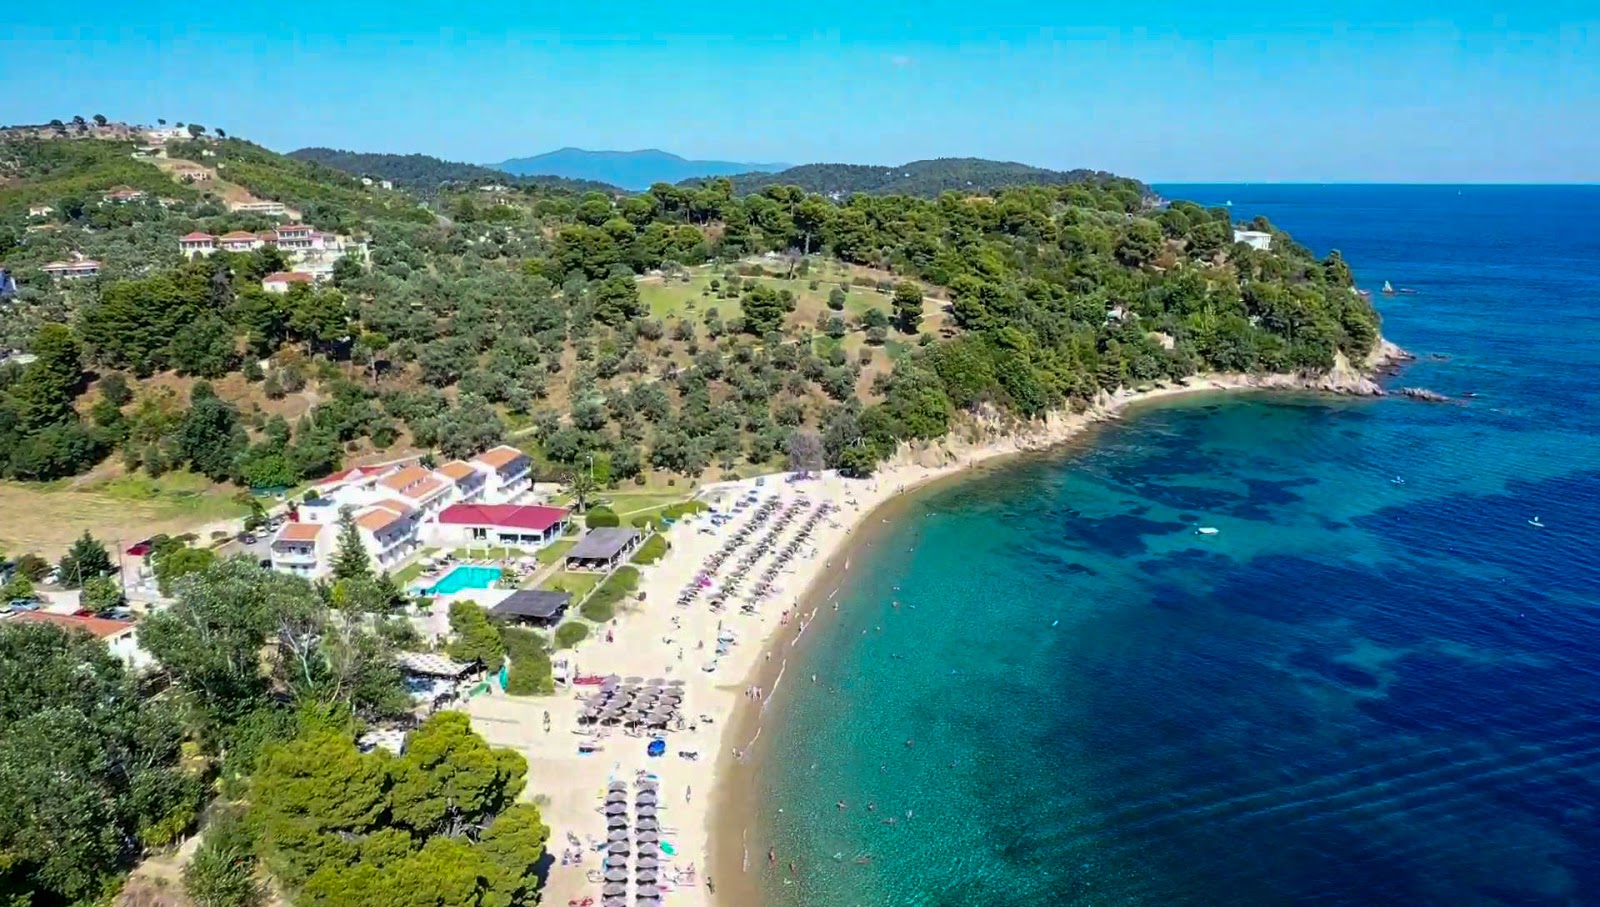 Photo of Troulos beach - popular place among relax connoisseurs